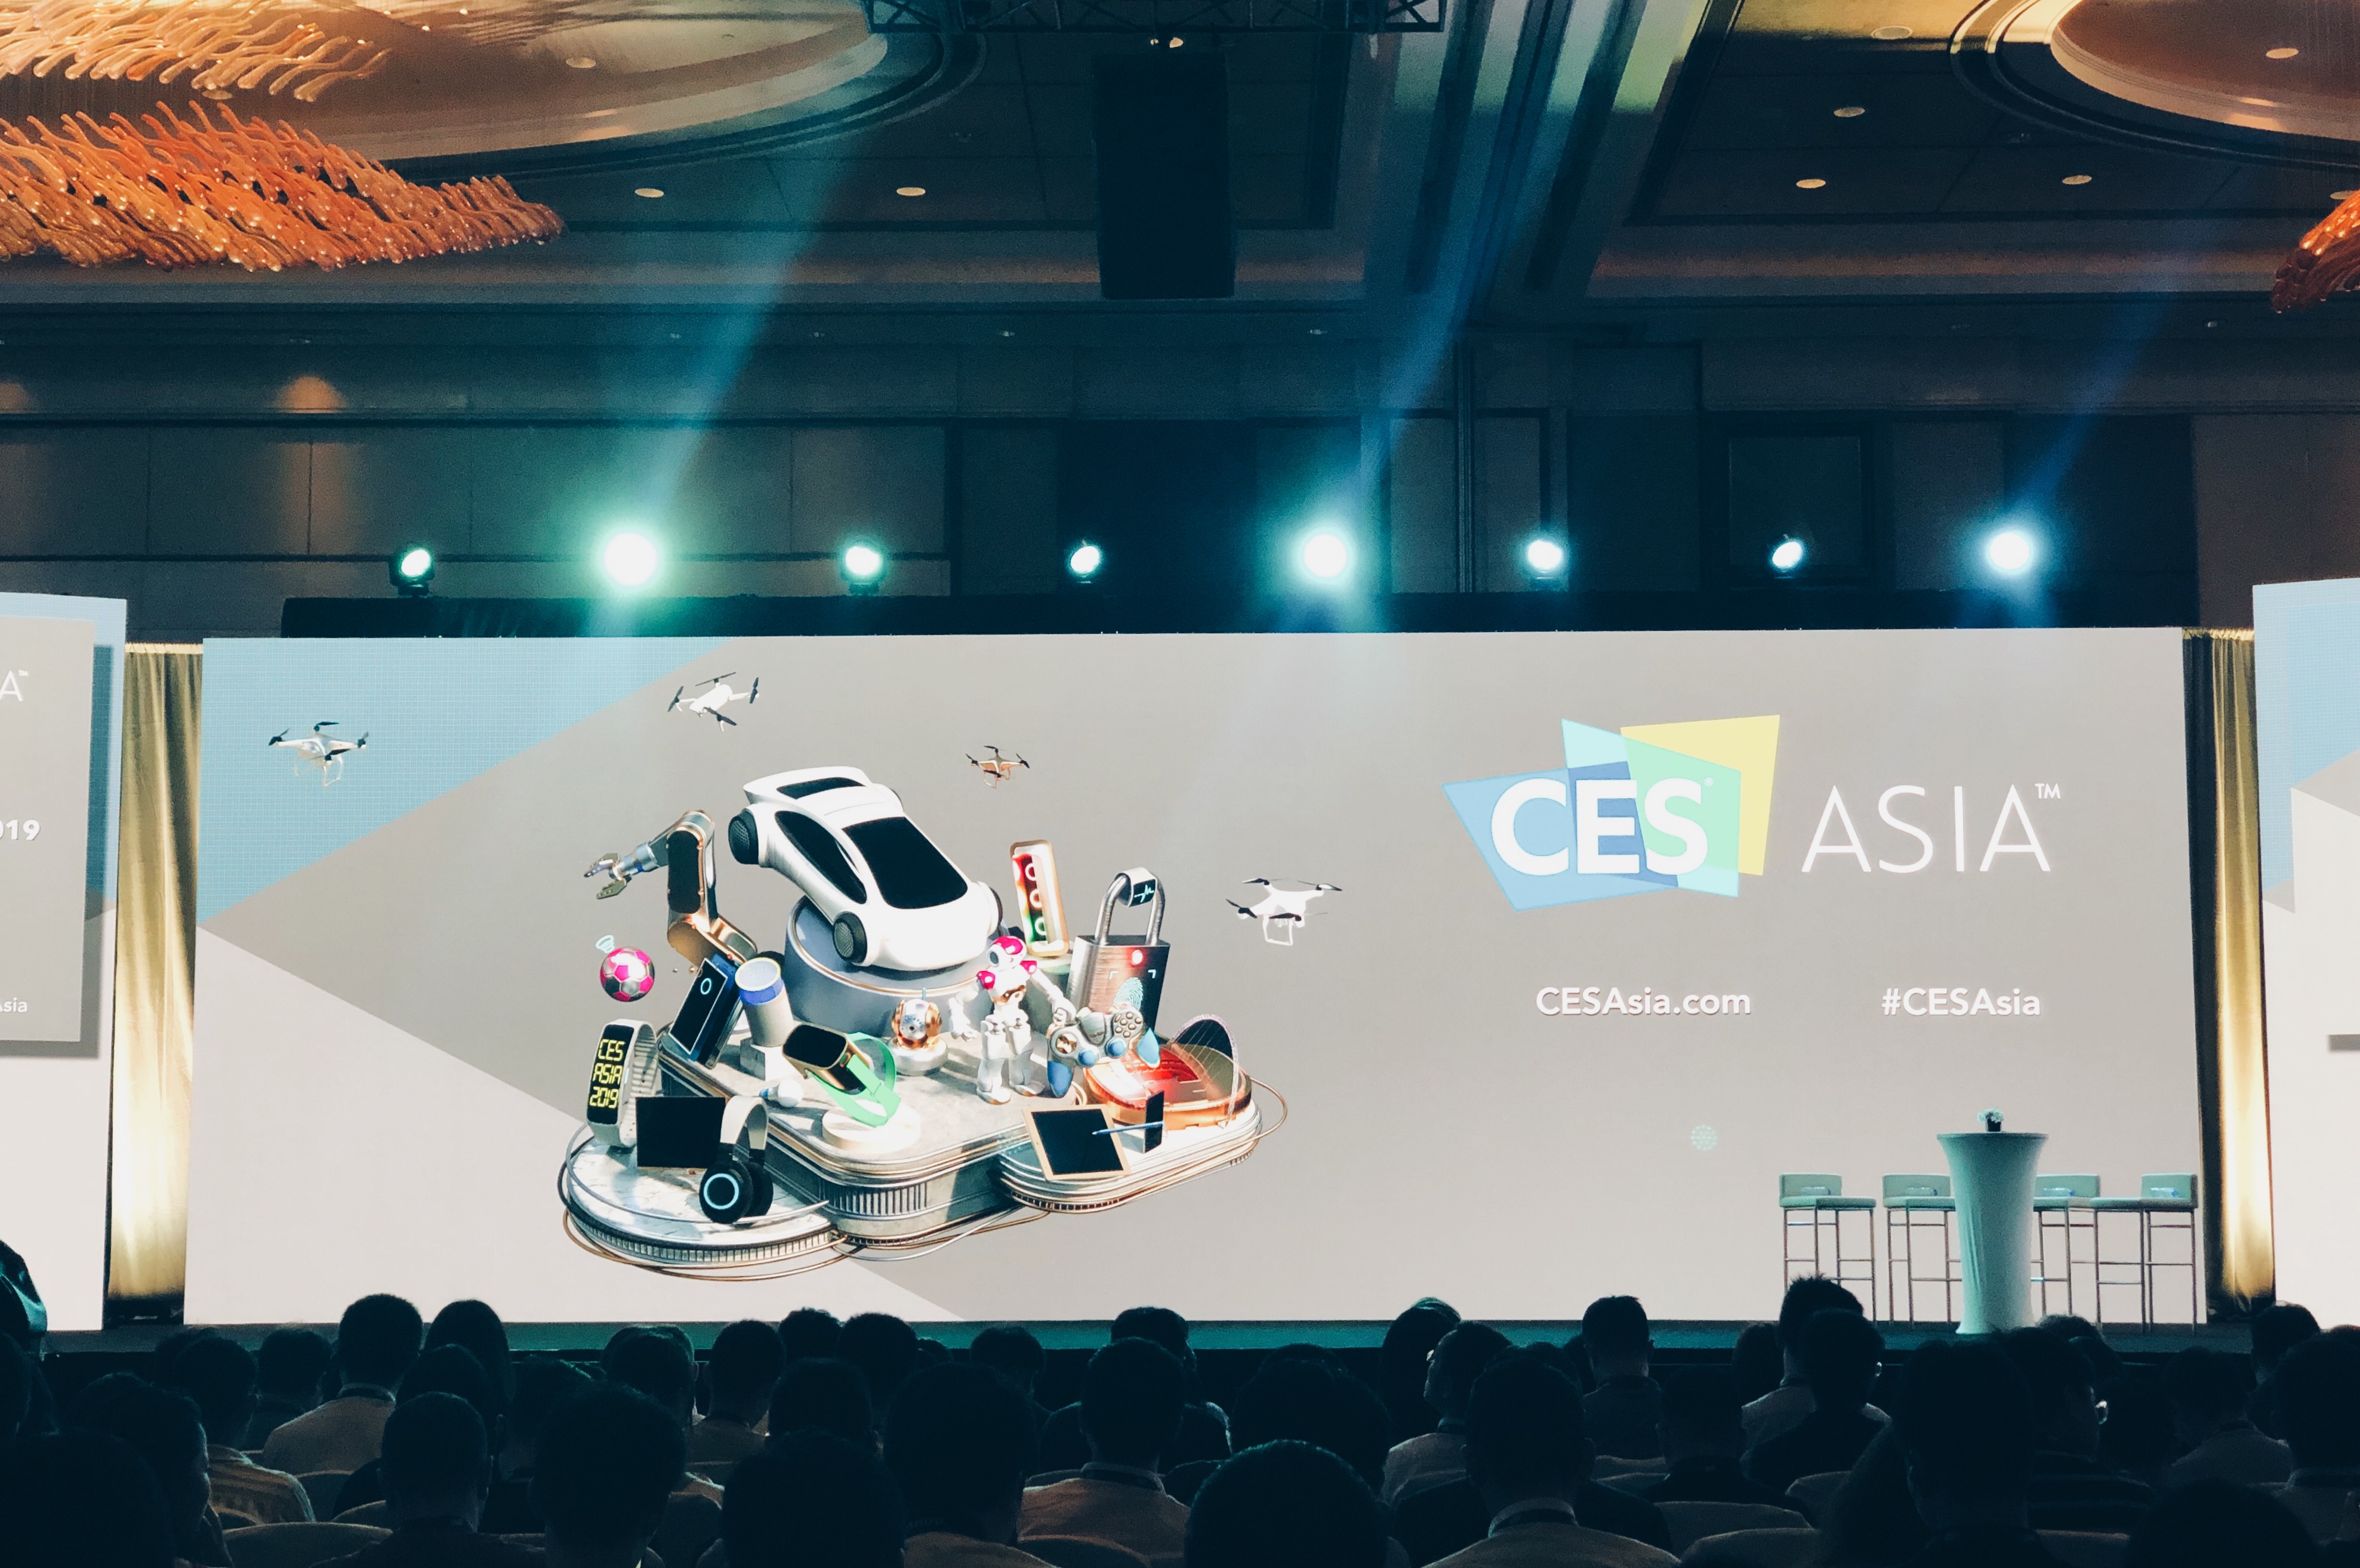 CES Asia 2019 Conference